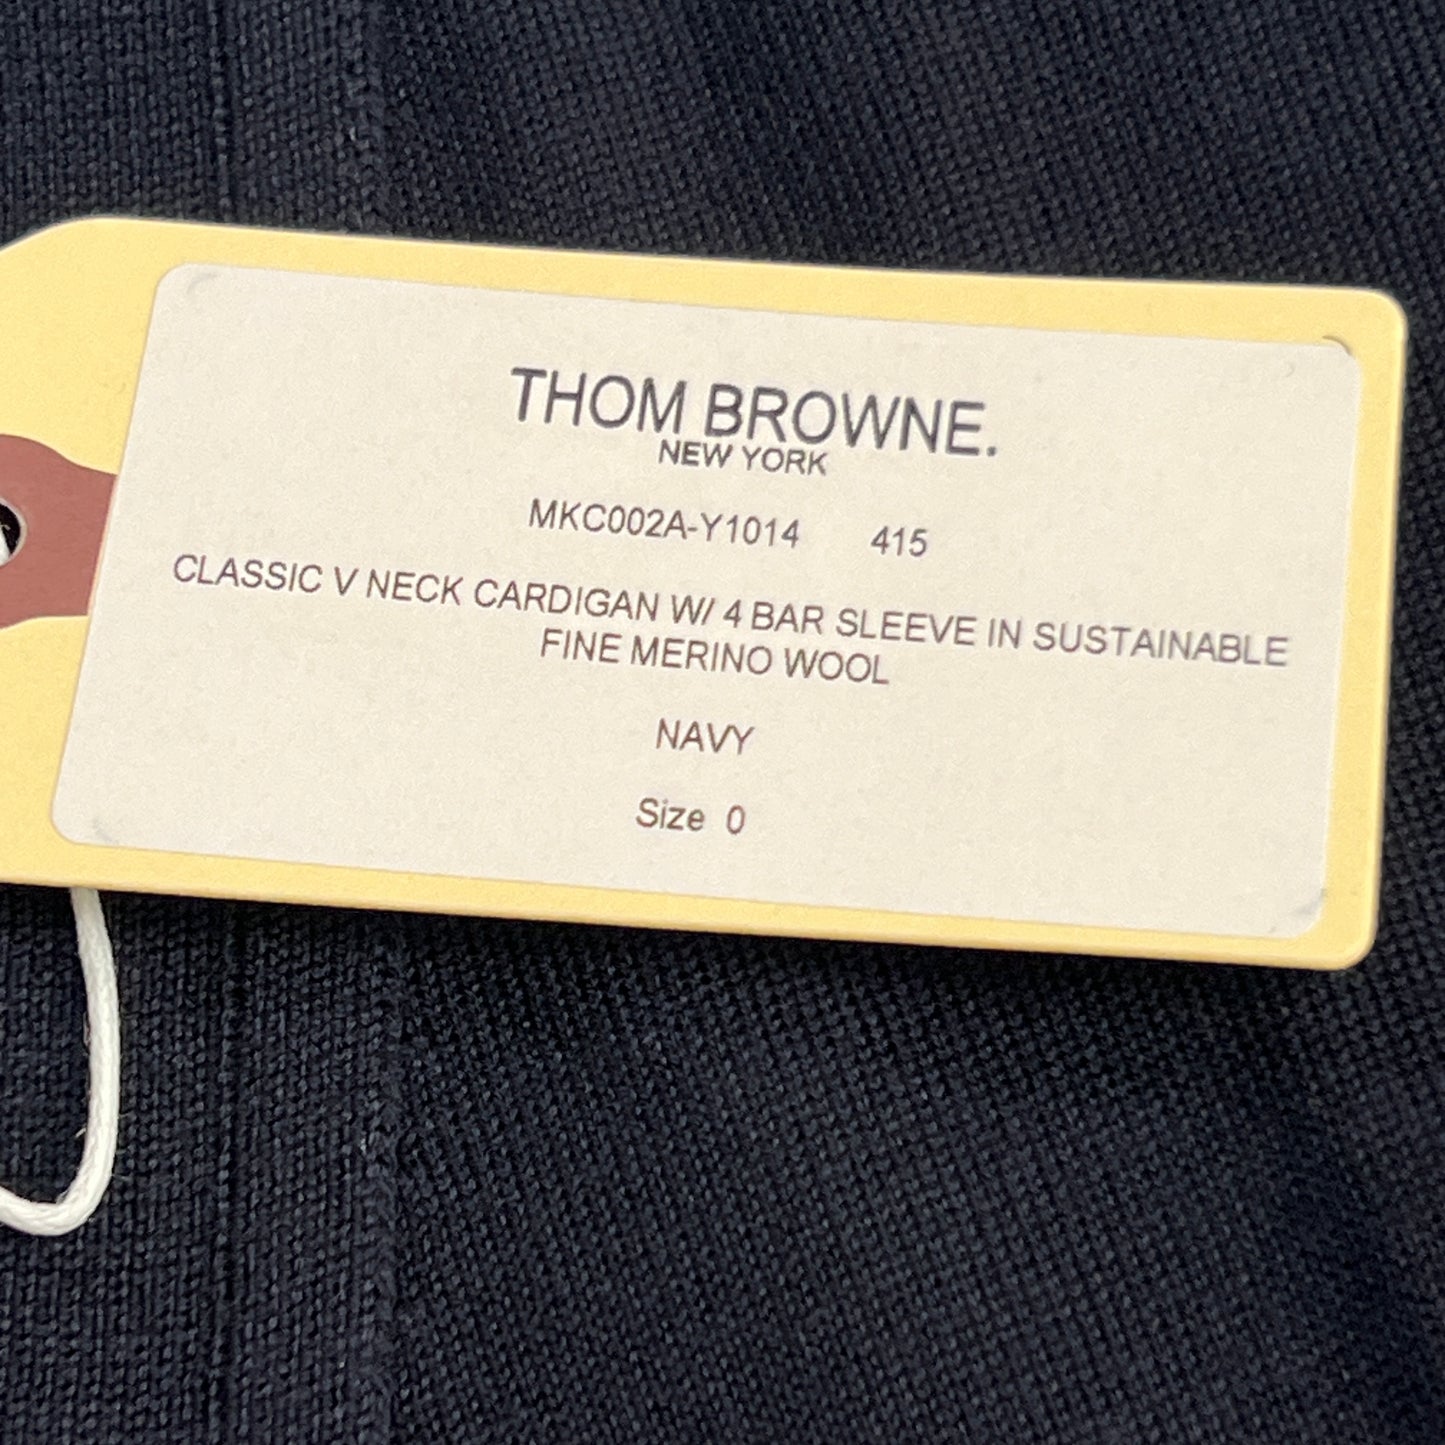 THOM BROWNE V-NECK Cardigan w/ 4Bar Sleeve in Sustainable Fine Wool Size 0 (New)